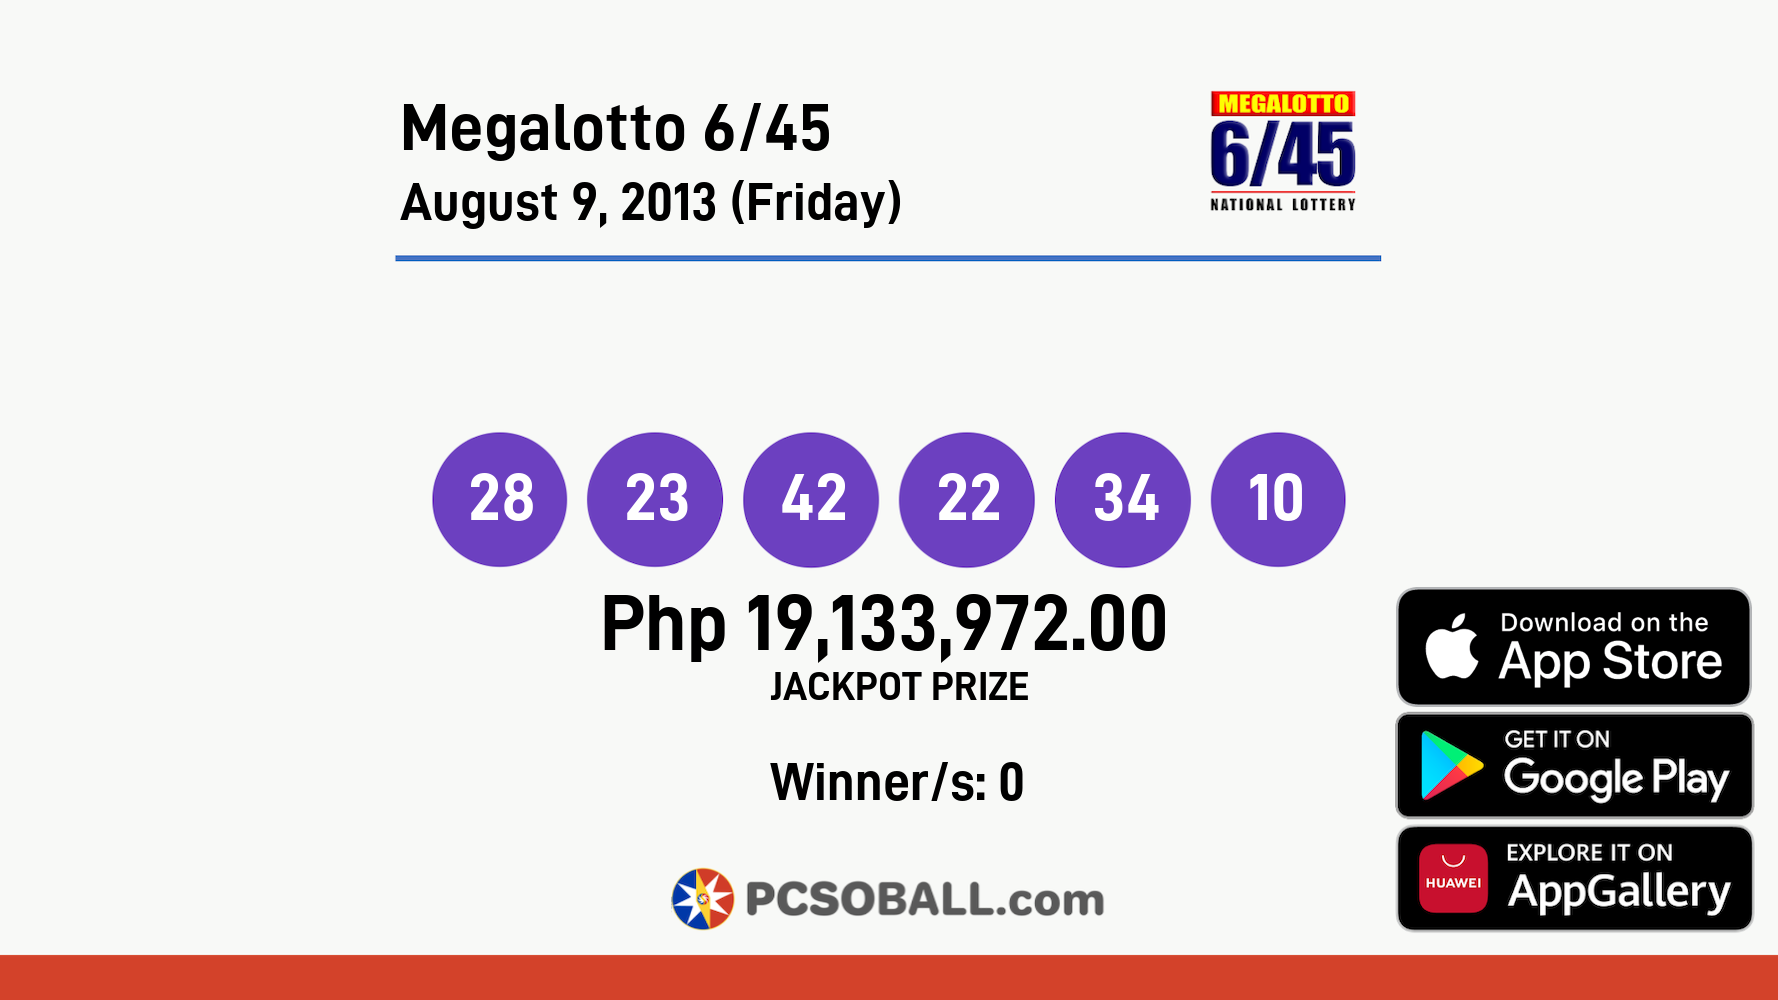 Megalotto 6/45 August 9, 2013 (Friday) Result